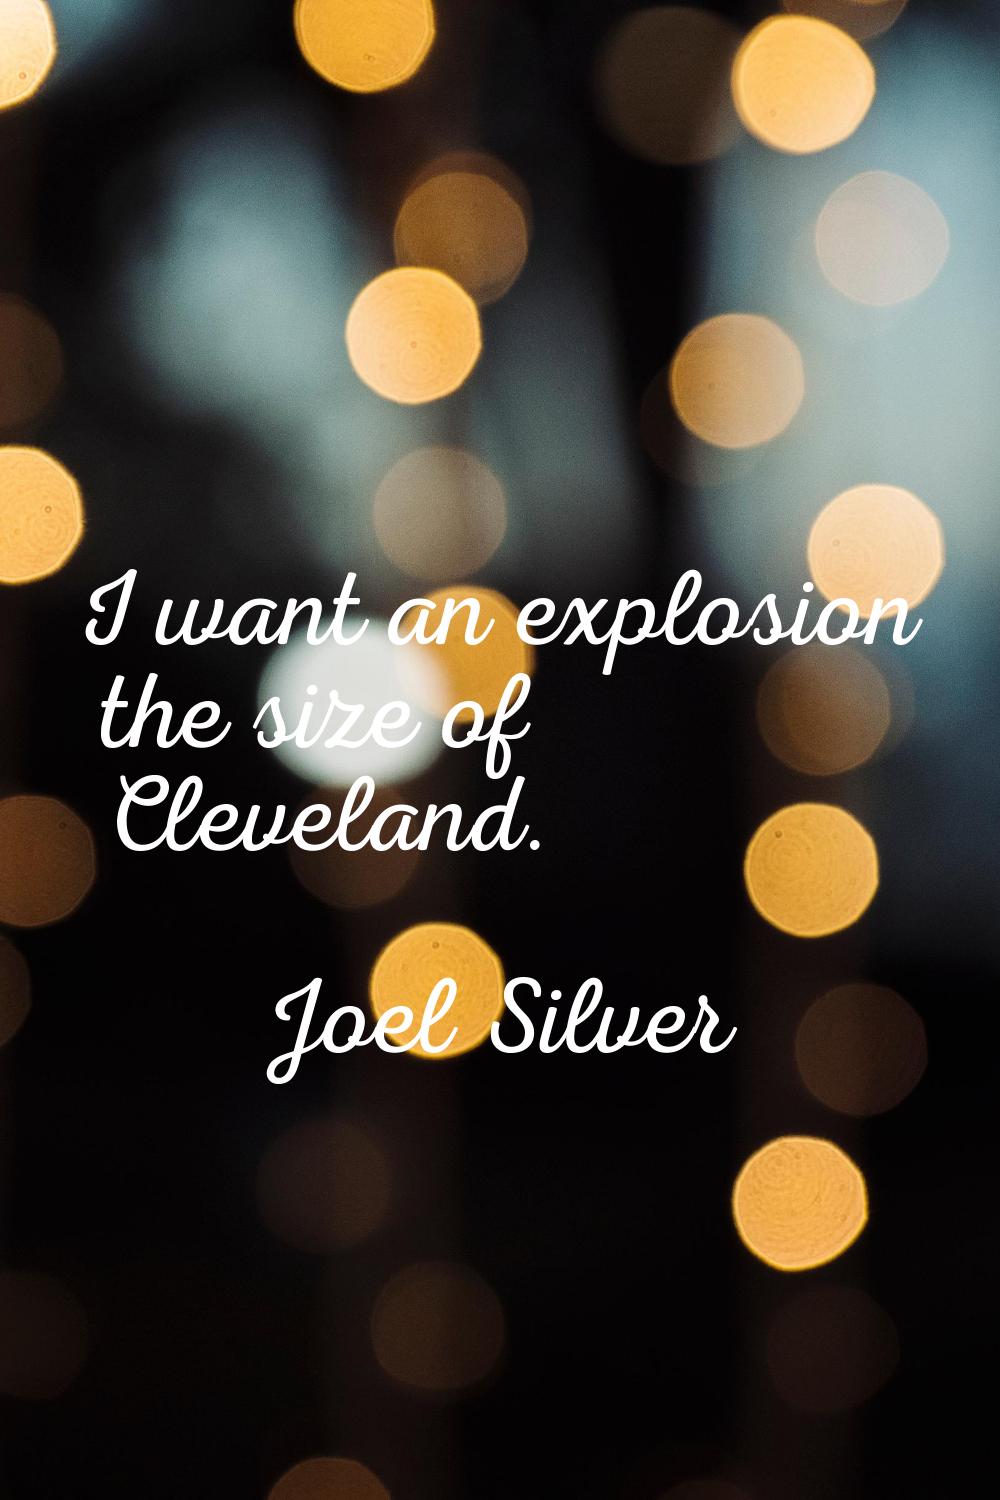 I want an explosion the size of Cleveland.